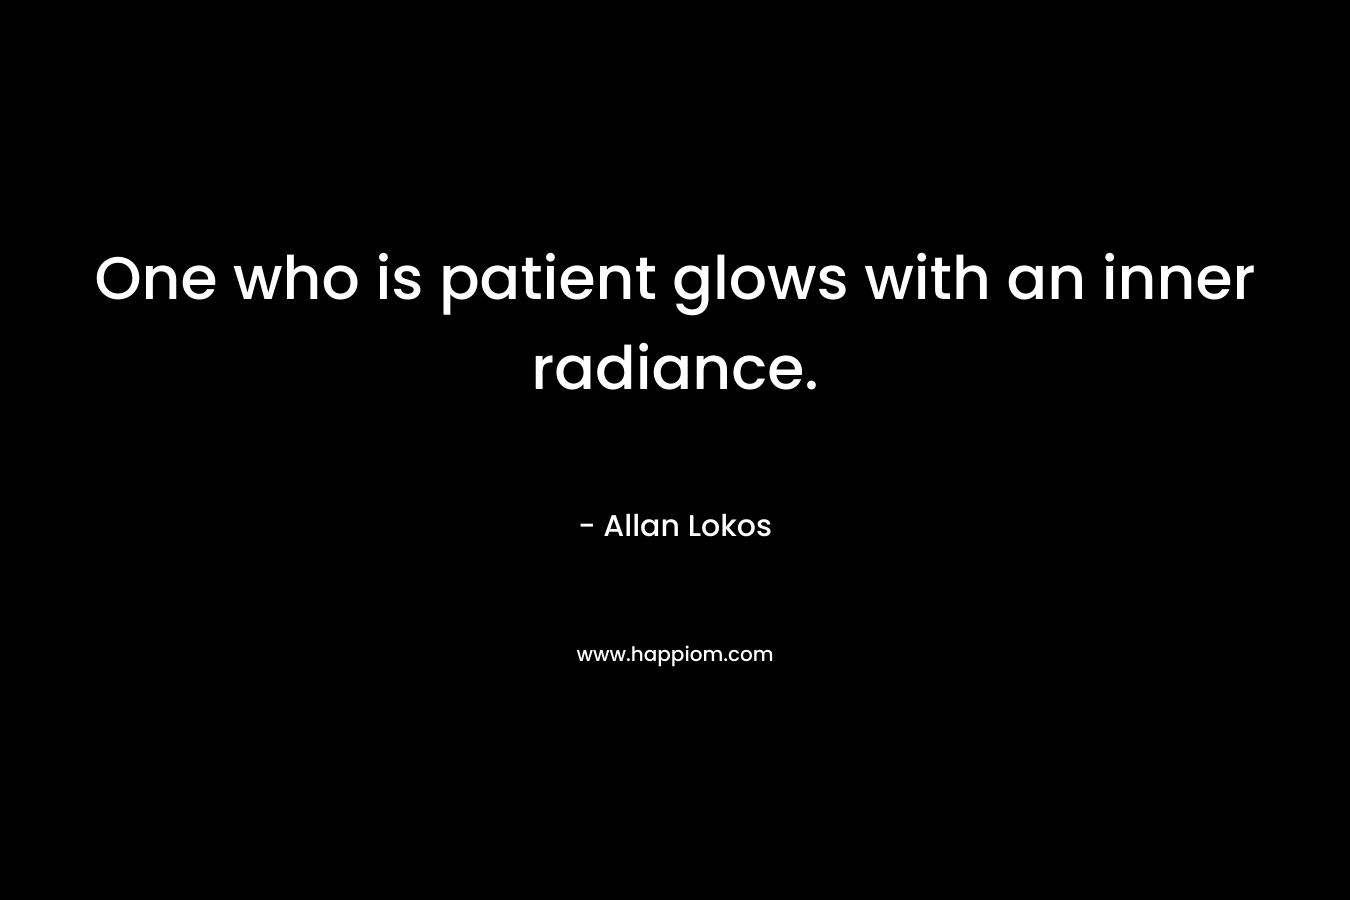 One who is patient glows with an inner radiance.